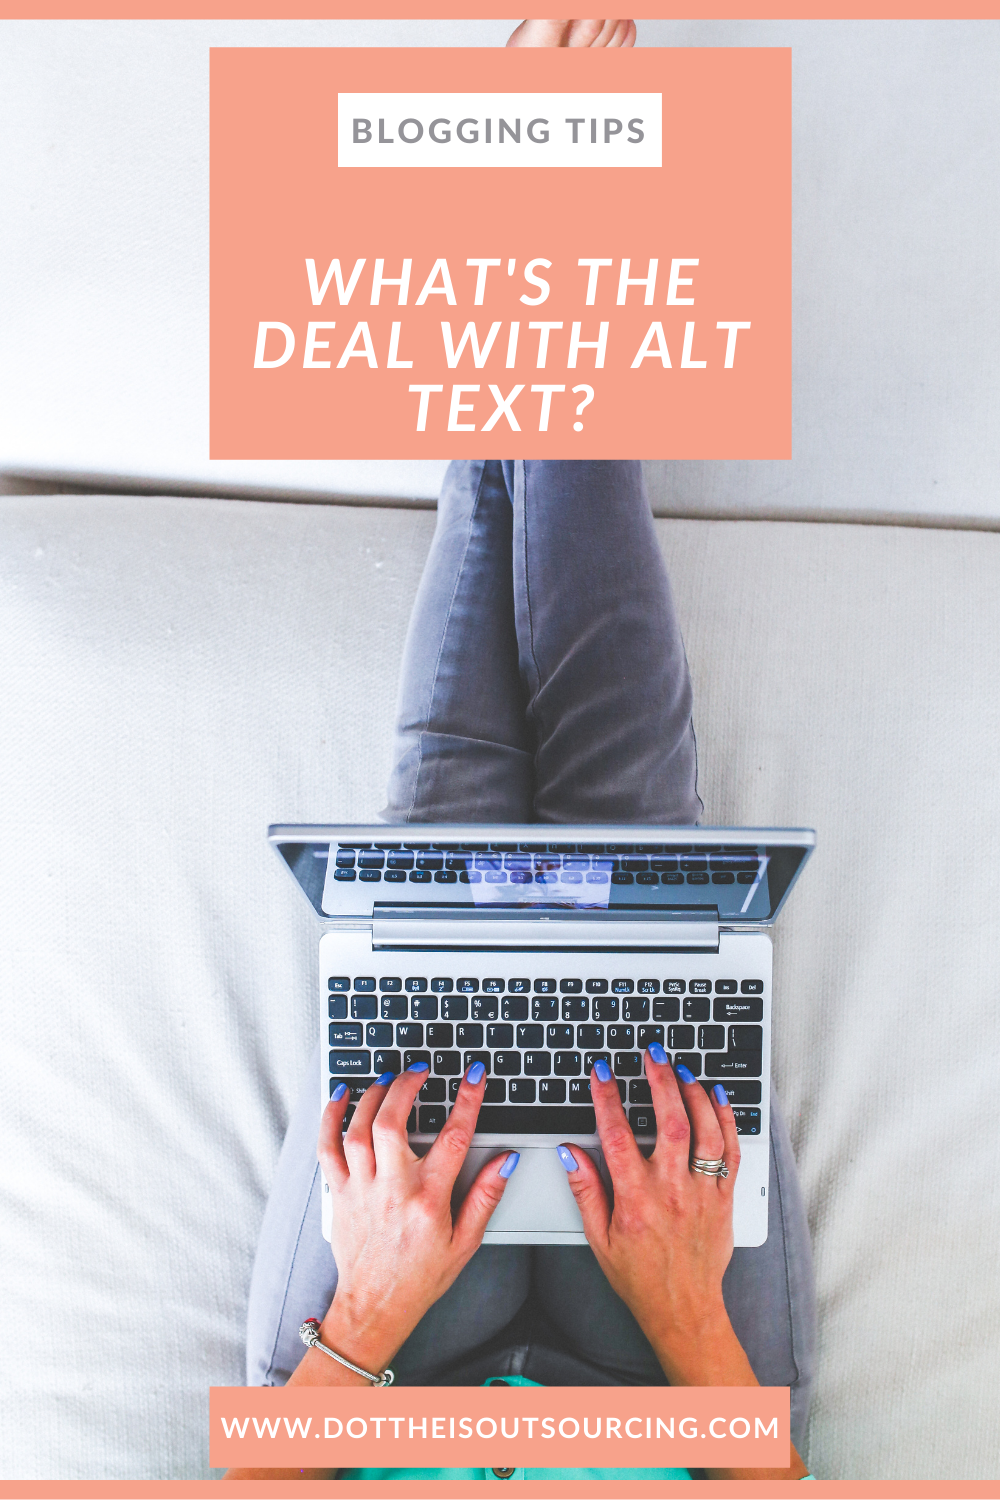 Why adding alt text to your blog matters and what it means